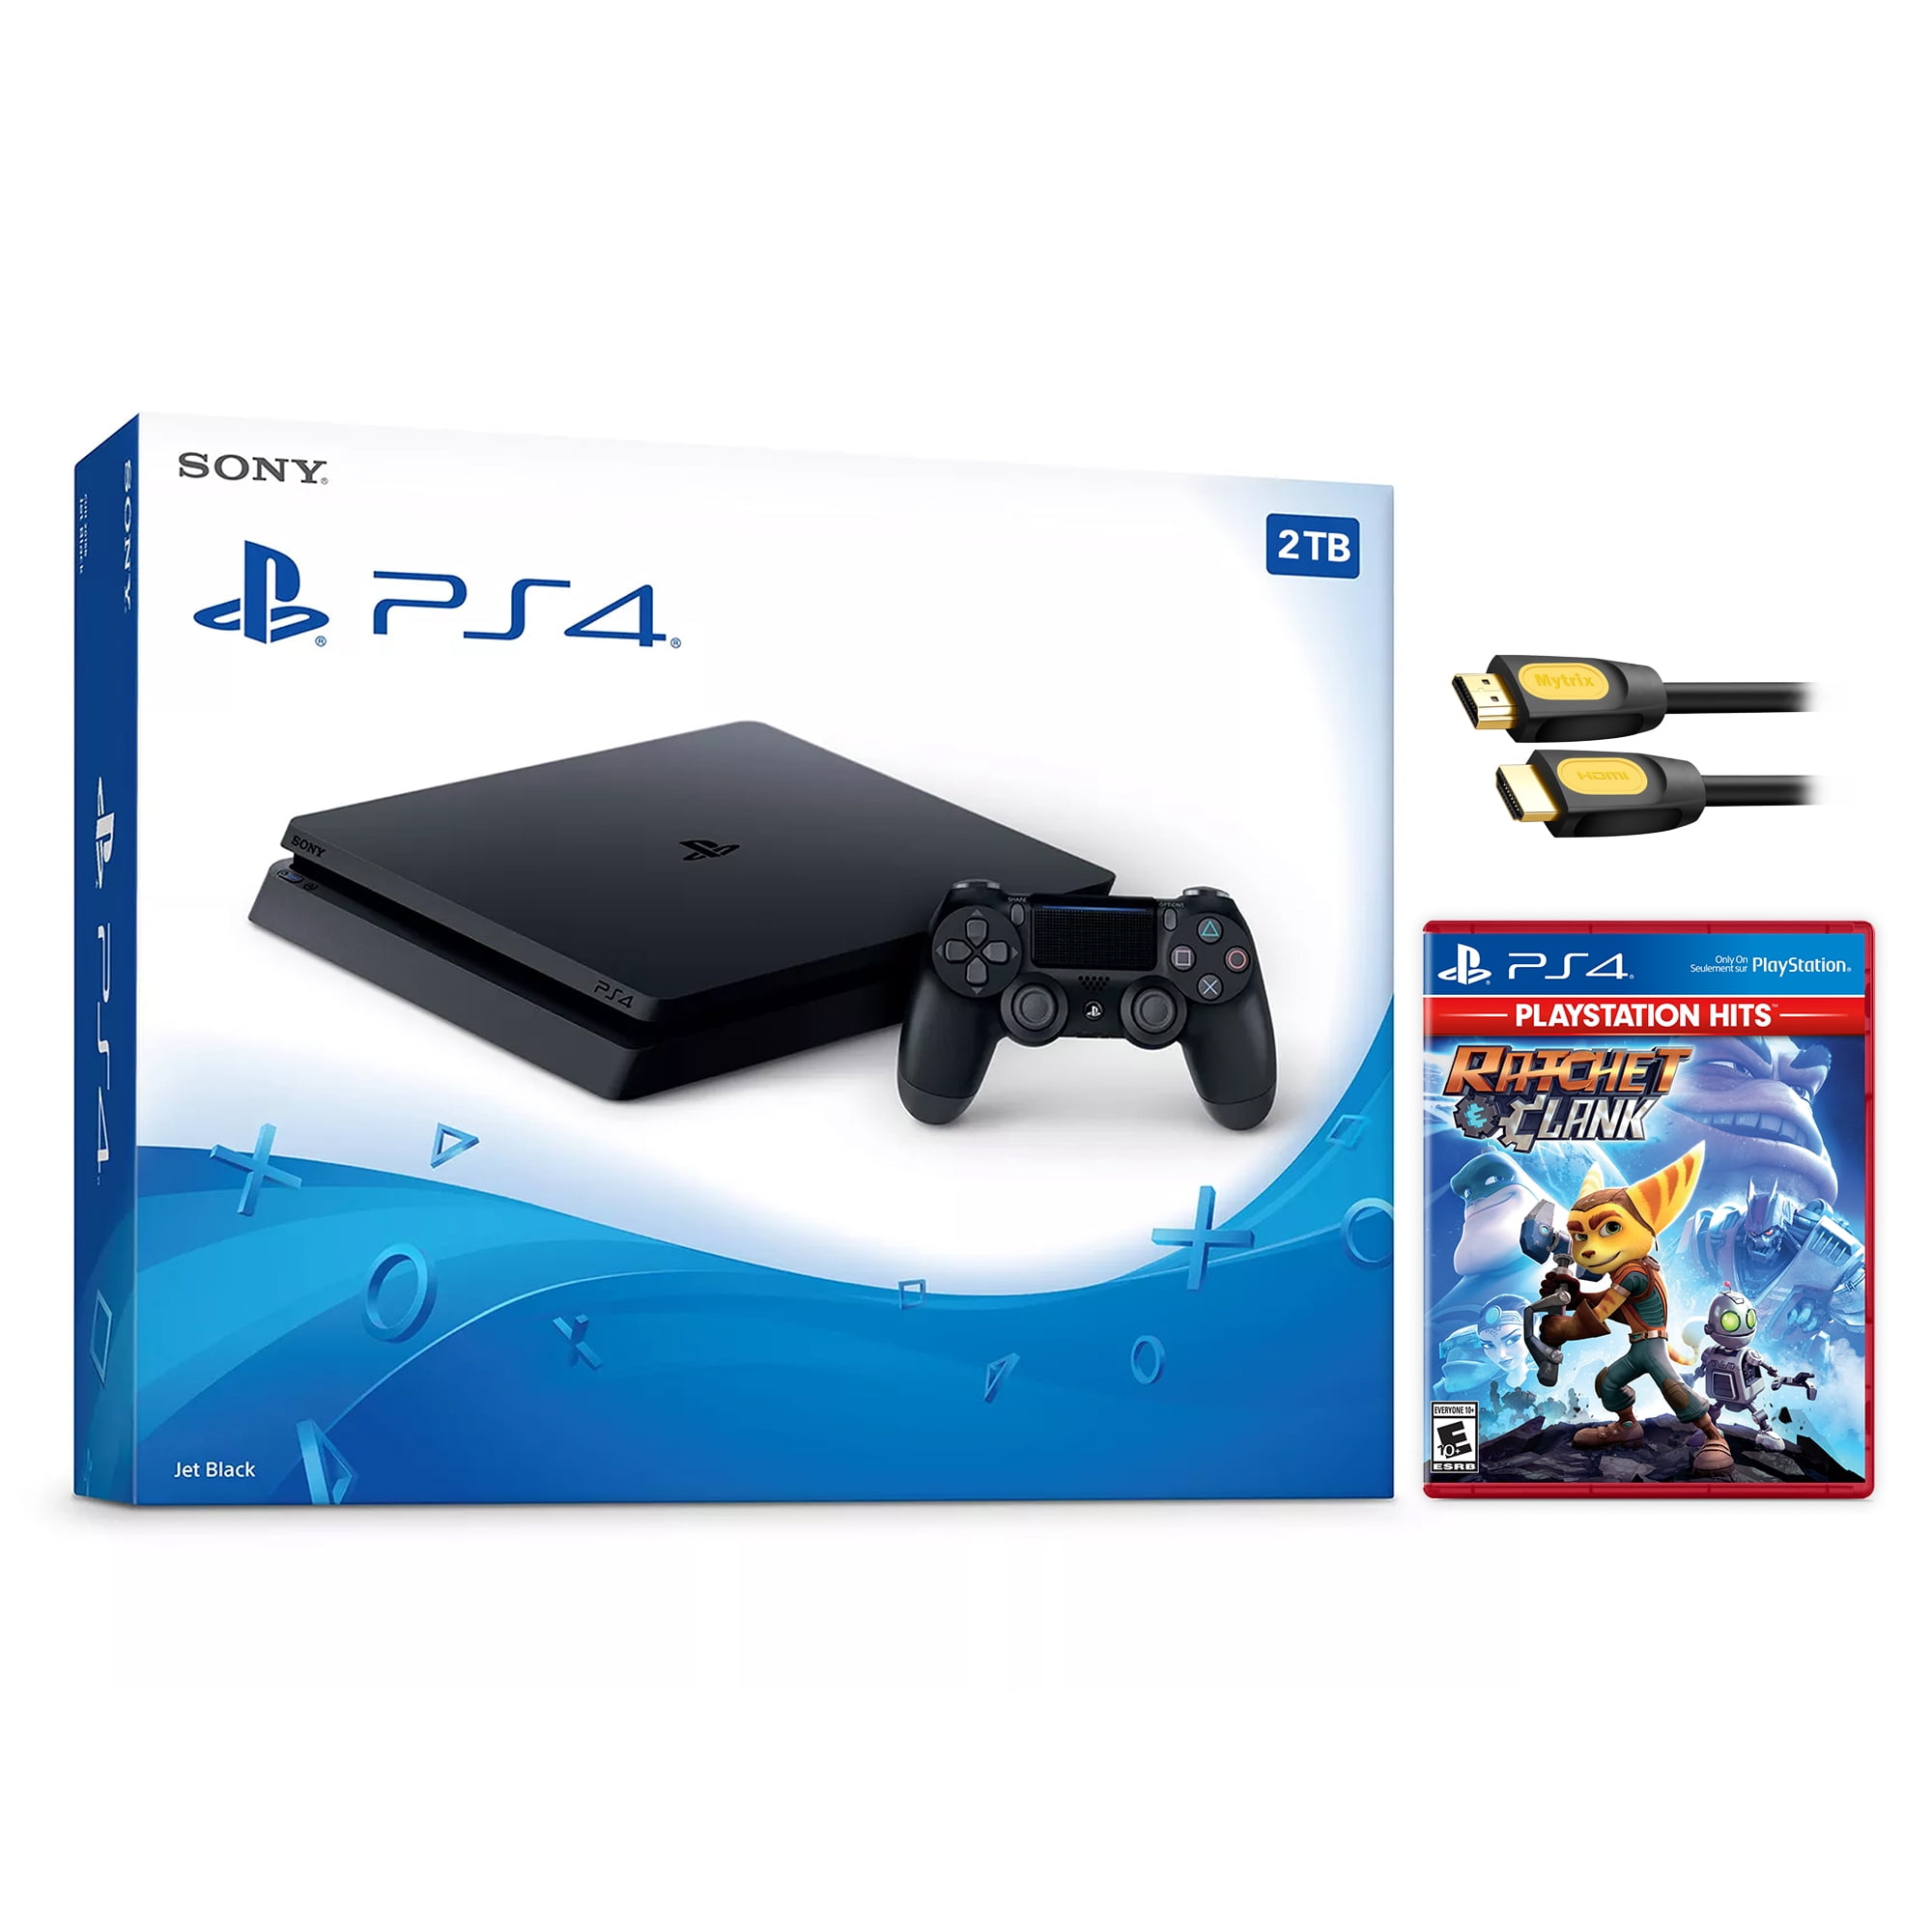 Sony PlayStation 4 Slim Storage Upgrade 1TB SSD PS4 Gaming Console 